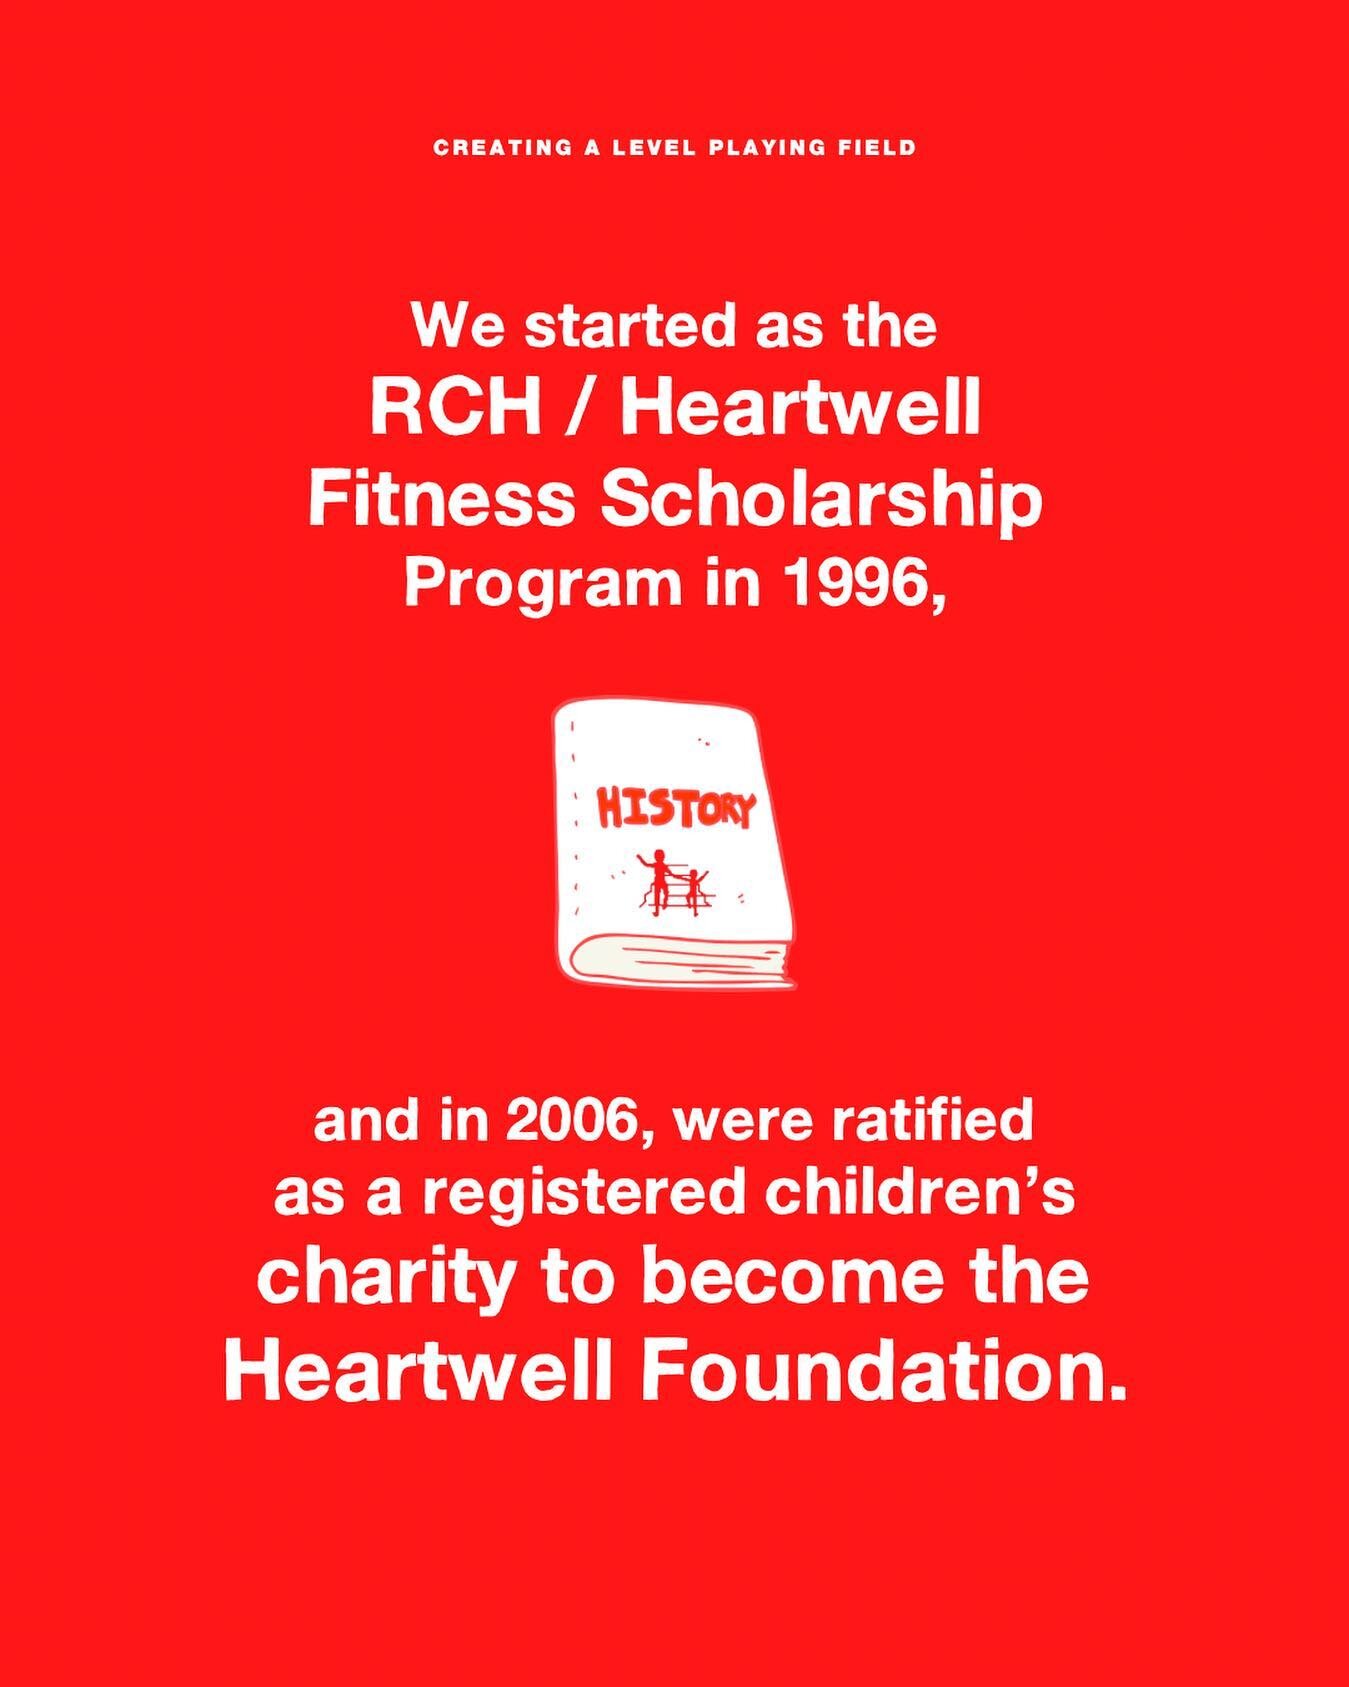 Our roots began as a collaboration between @HeartwellFitness &amp; the @RCHMelbourne, and have evolved into what is now the separate not-for-profit, the Heartwell Foundation.

#CreatingALevelPlayingField 

Image description:
In white text over red ba